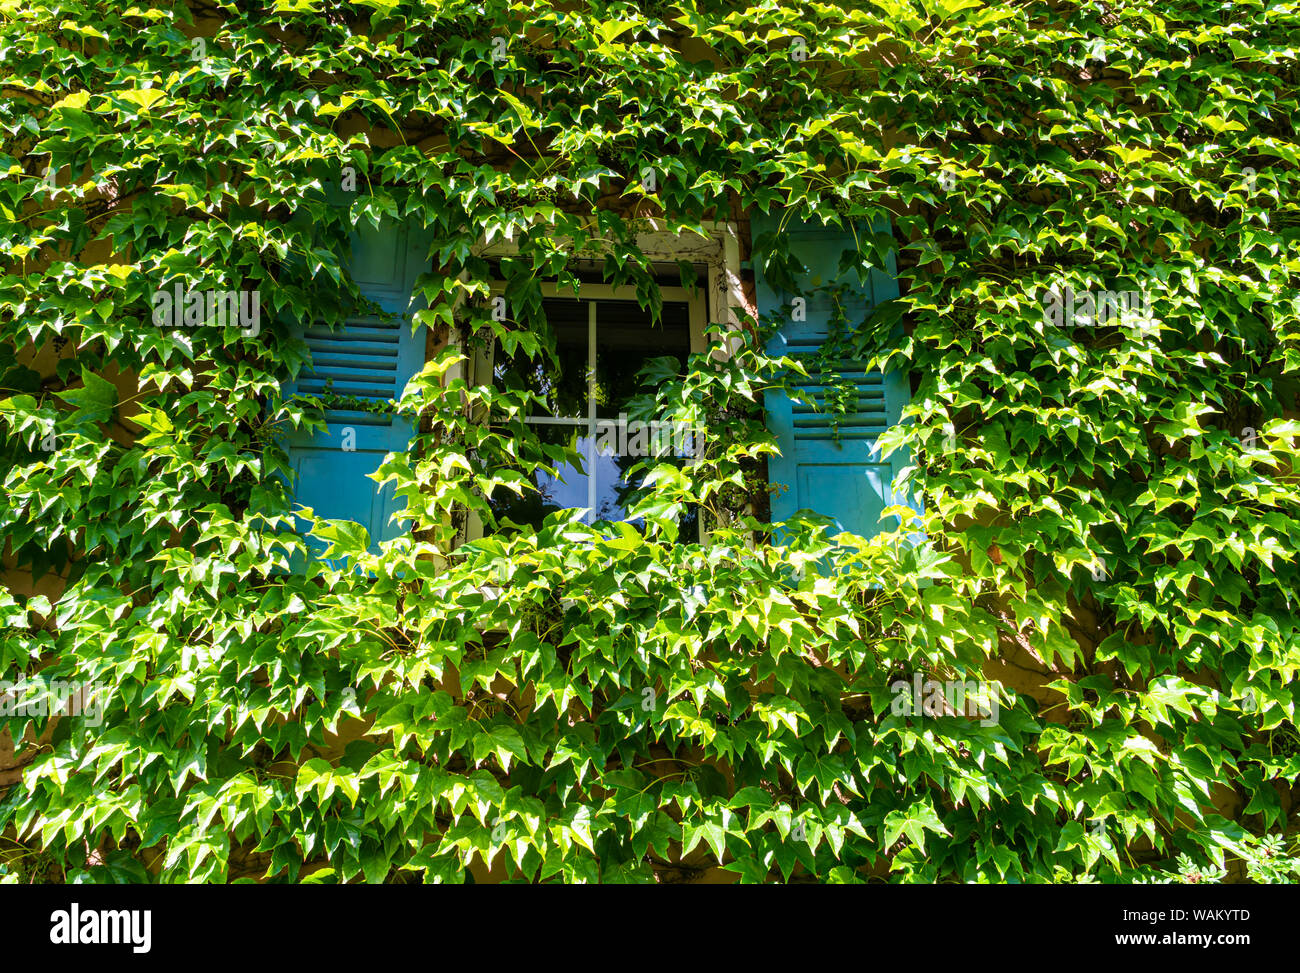 The wall of the building is covered with vines. Fresh green leaves. Blue shutters. Green climbing plants. Stock Photo